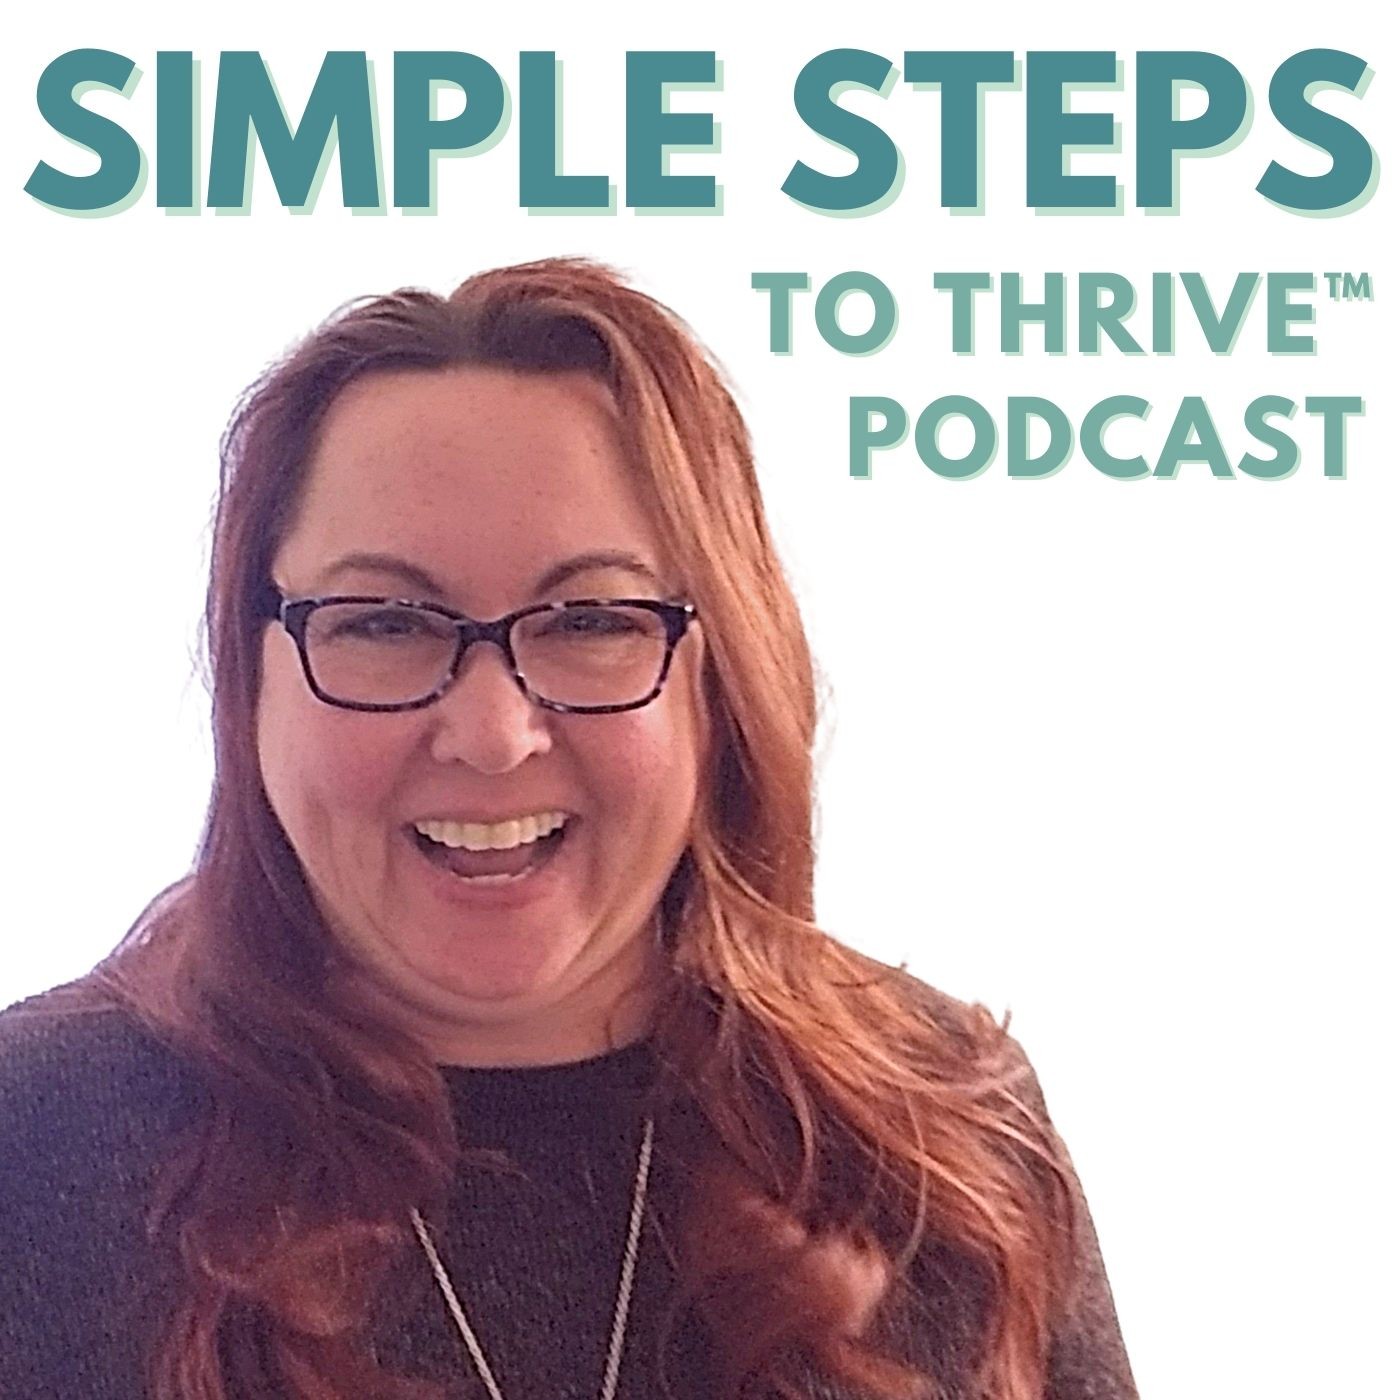 Simple Steps to Thrive™